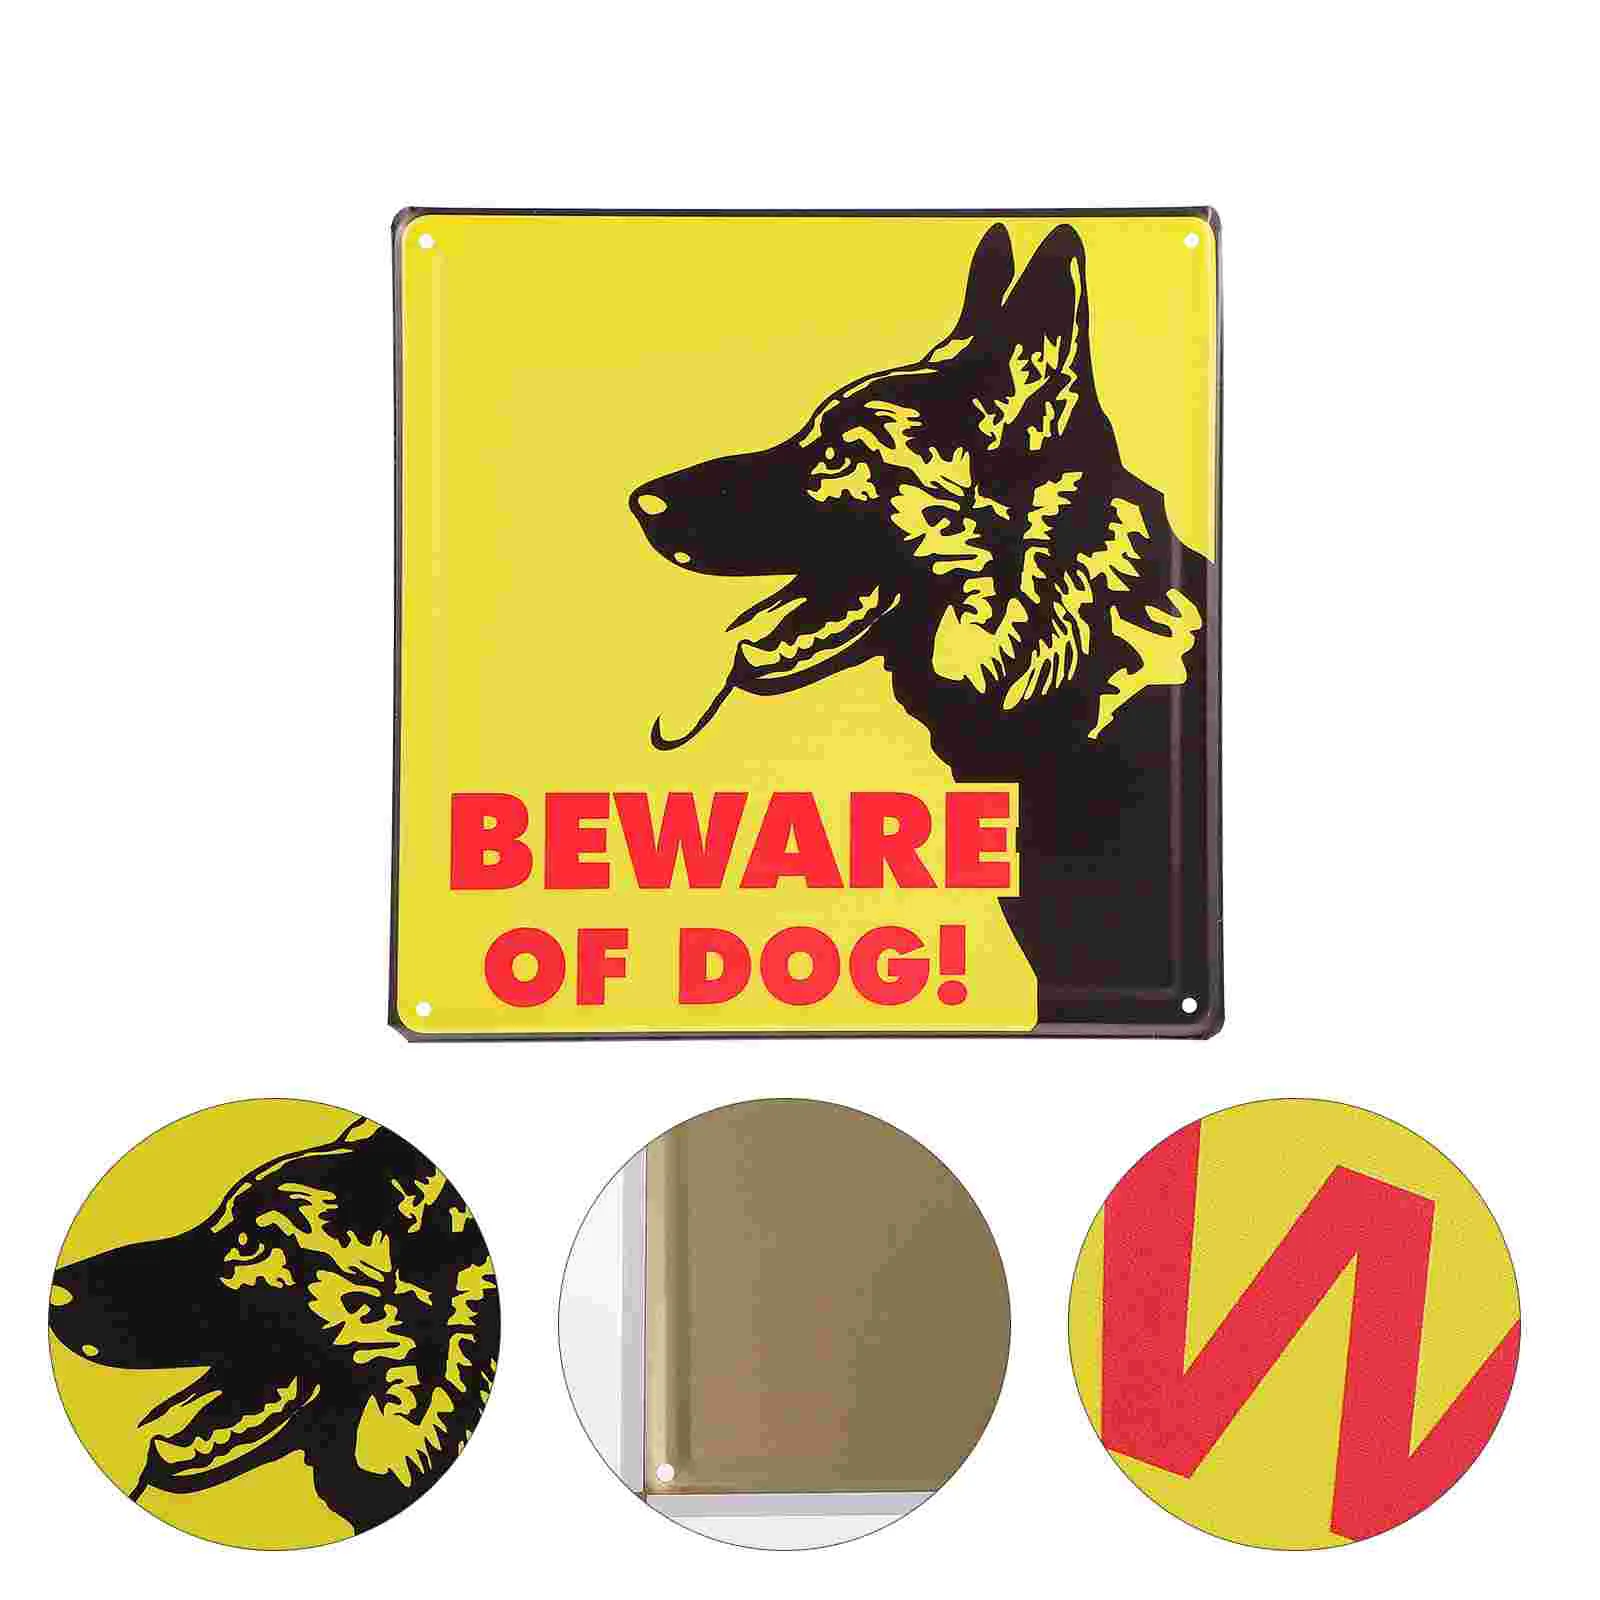 

Dog Sign Warning Signs Beware Metal Board Vintage Tin Guard Outdoor Gate Caution Safety Aluminum Duty Lawn Closed Keep Style